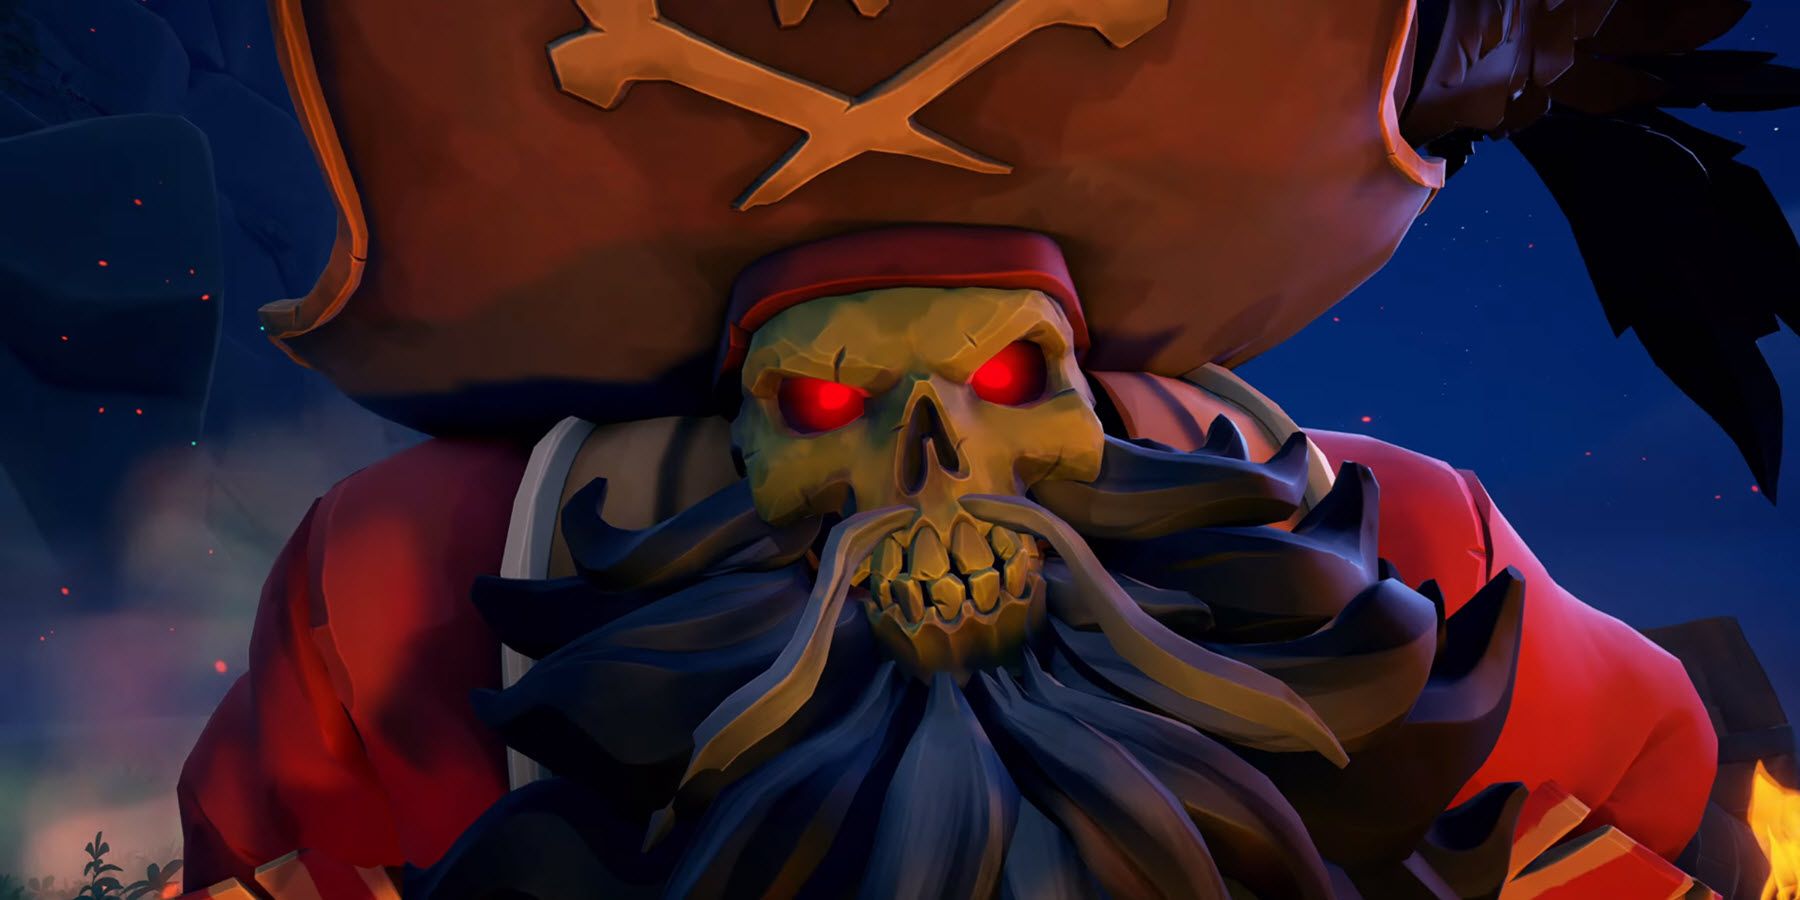 Sea of Thieves is Crossing Over With Monkey Island